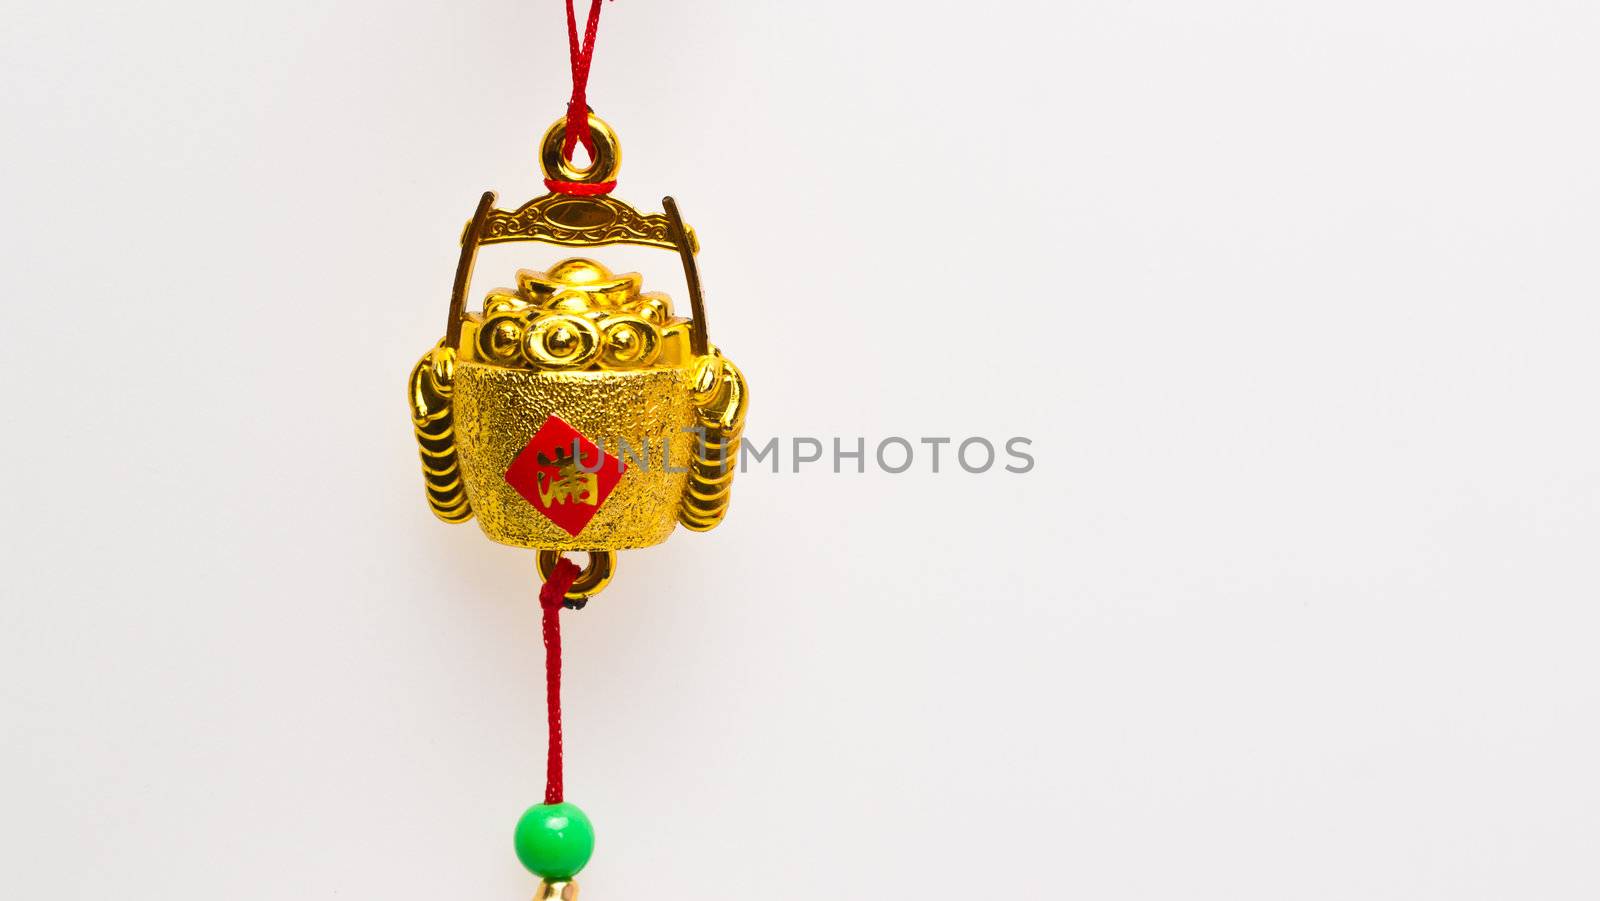 Hanging wealth pot pendant for Chinese New Year celebration against white surface